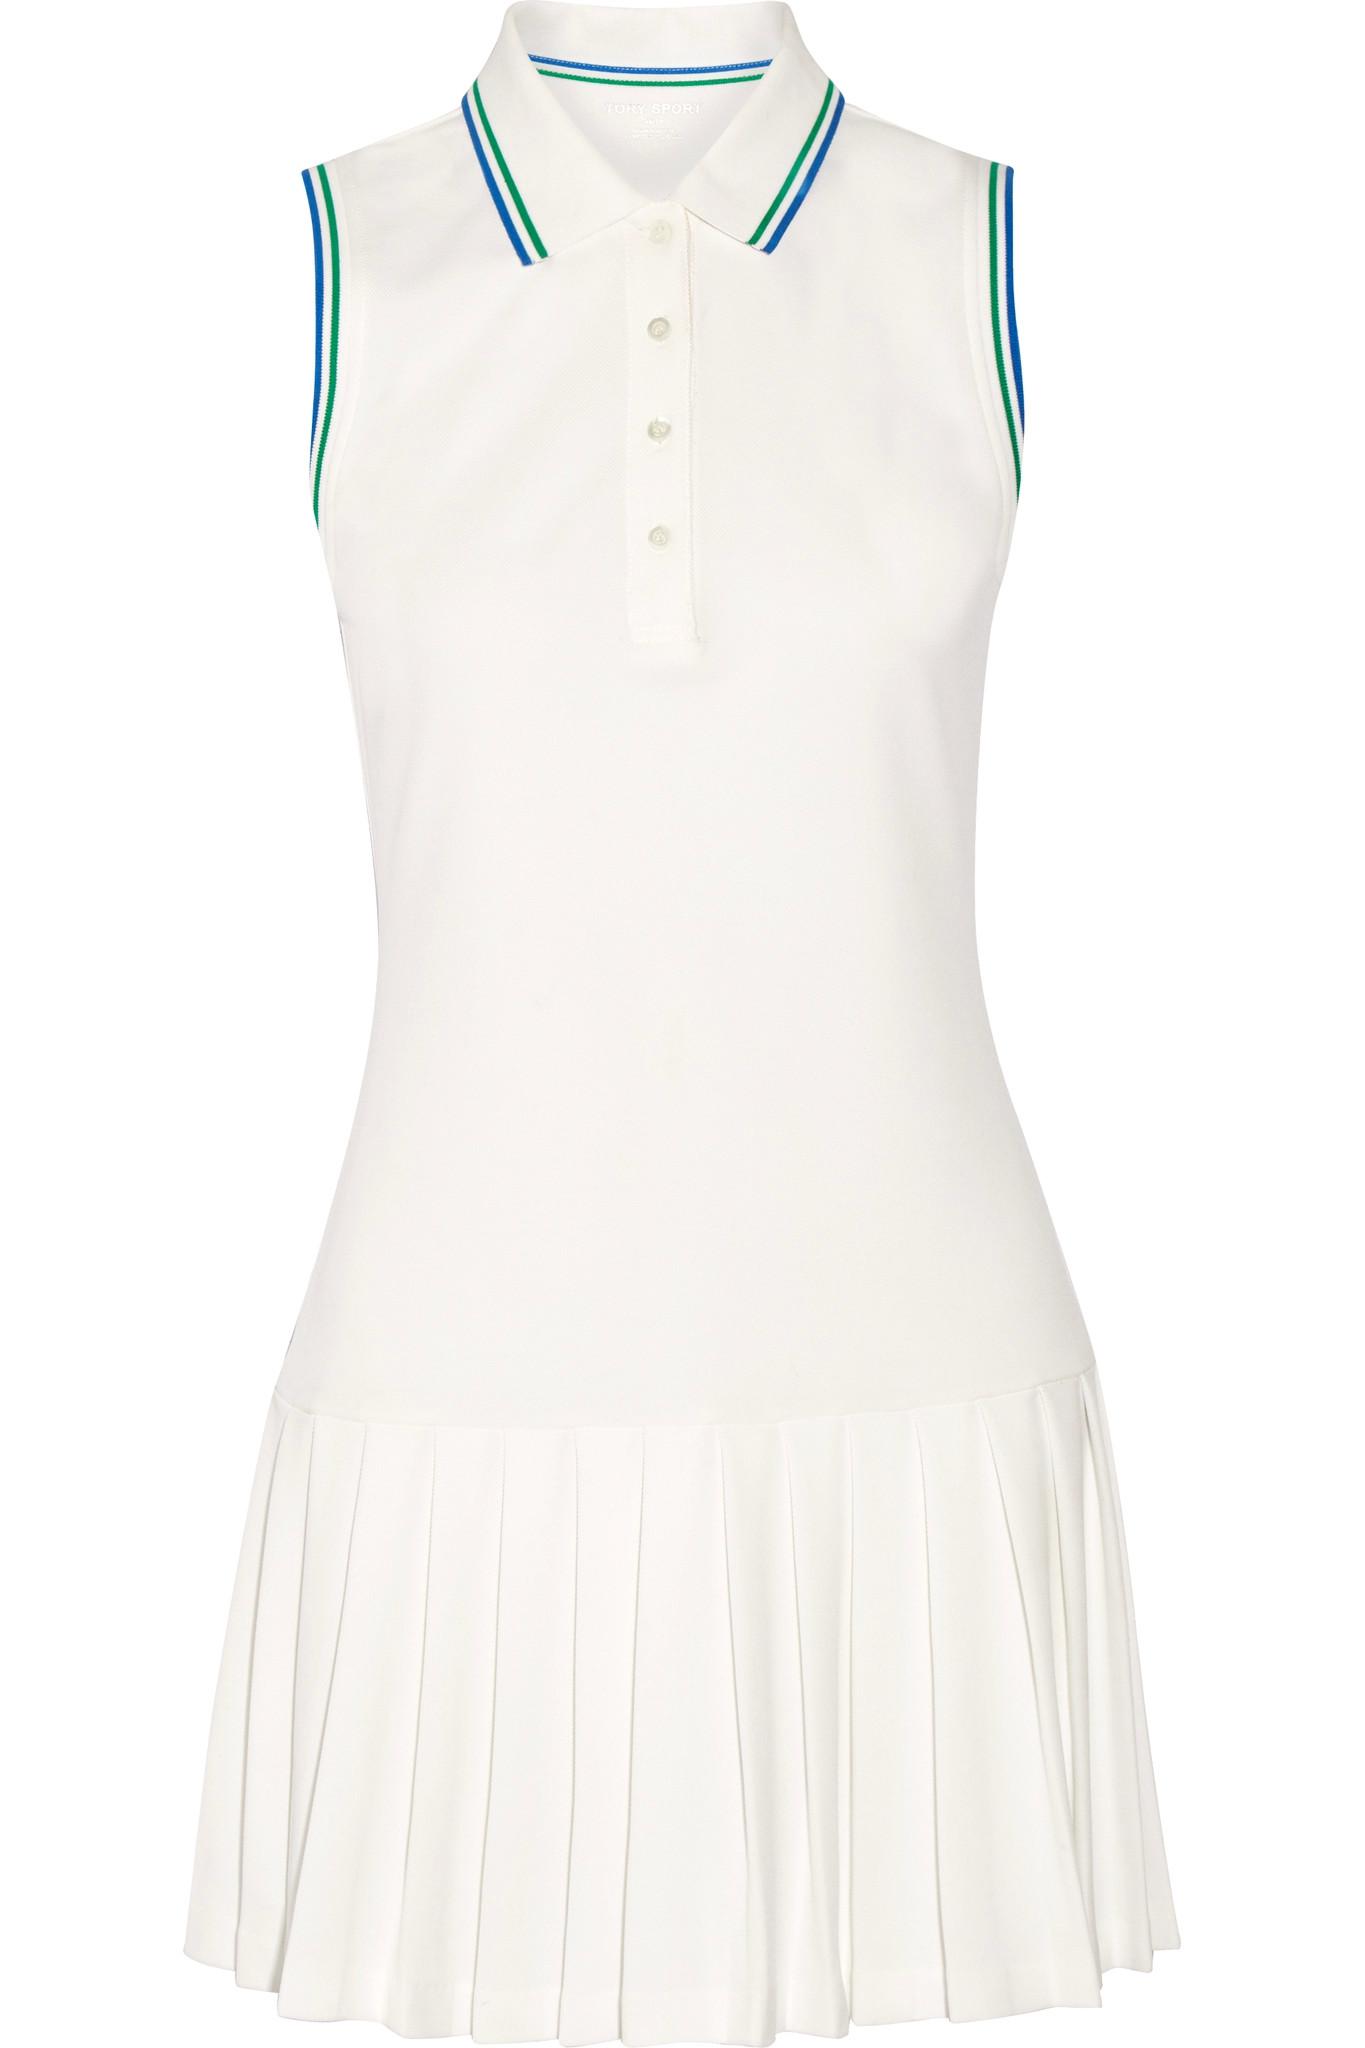 Tory Sport Pleated Piqué Tennis Dress in White | Lyst